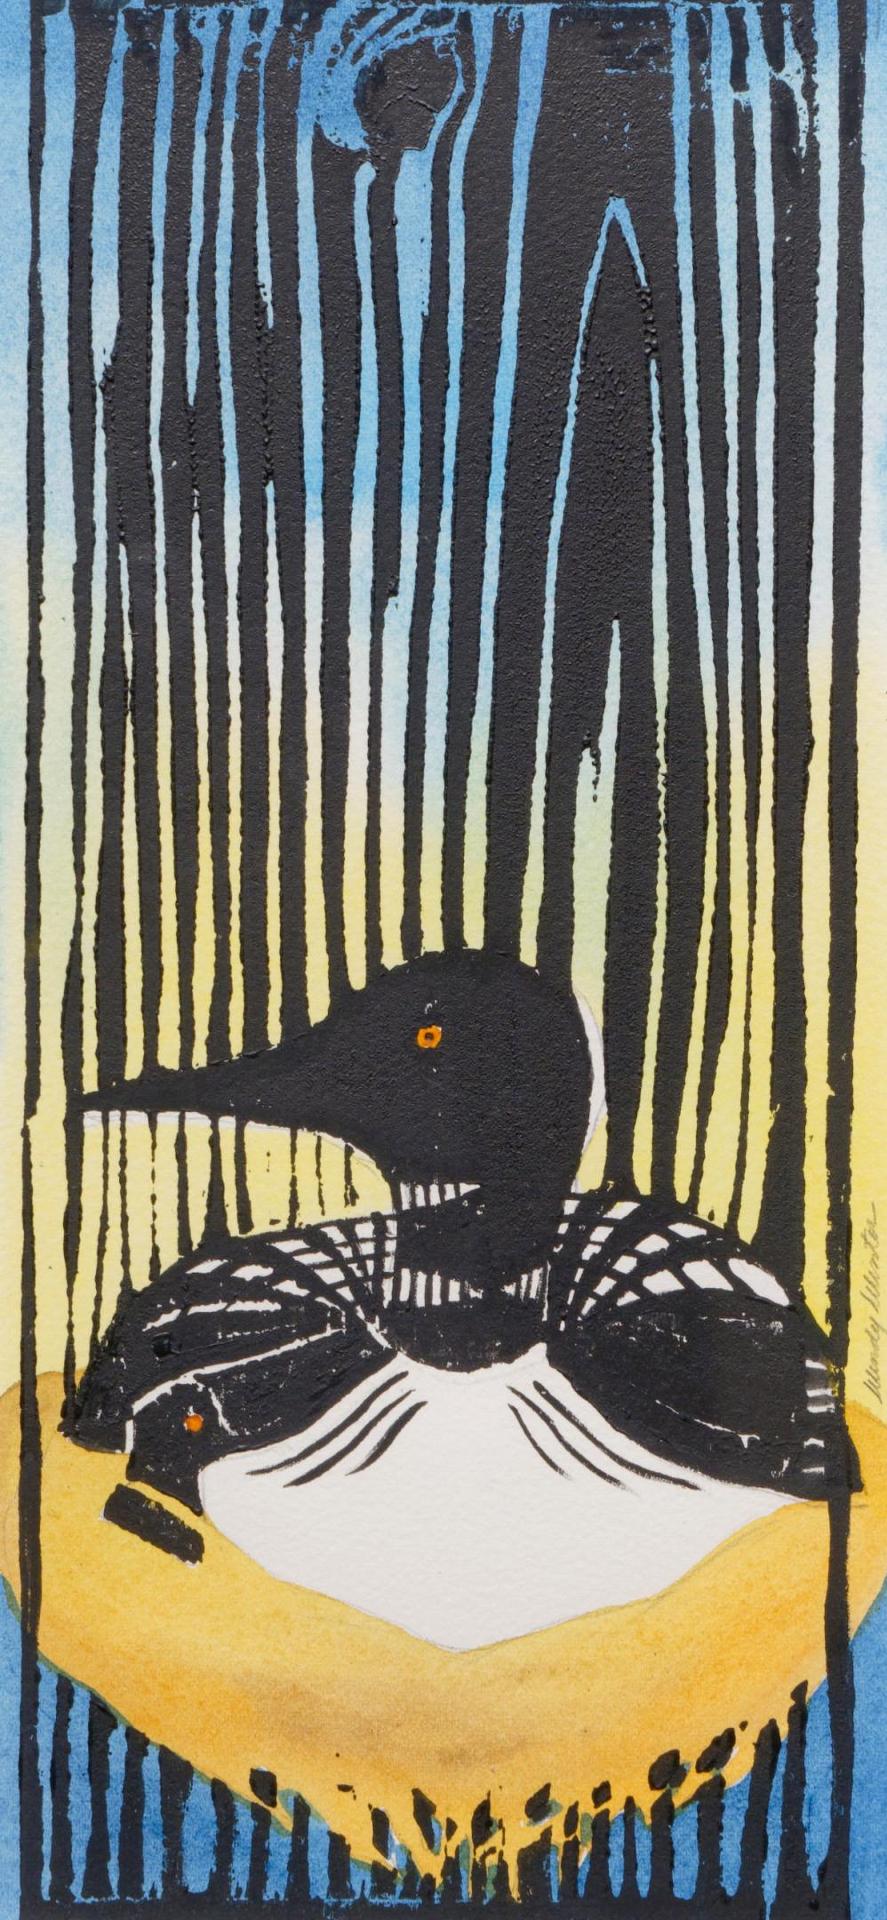 Wendy Winter - Untitled - Loon